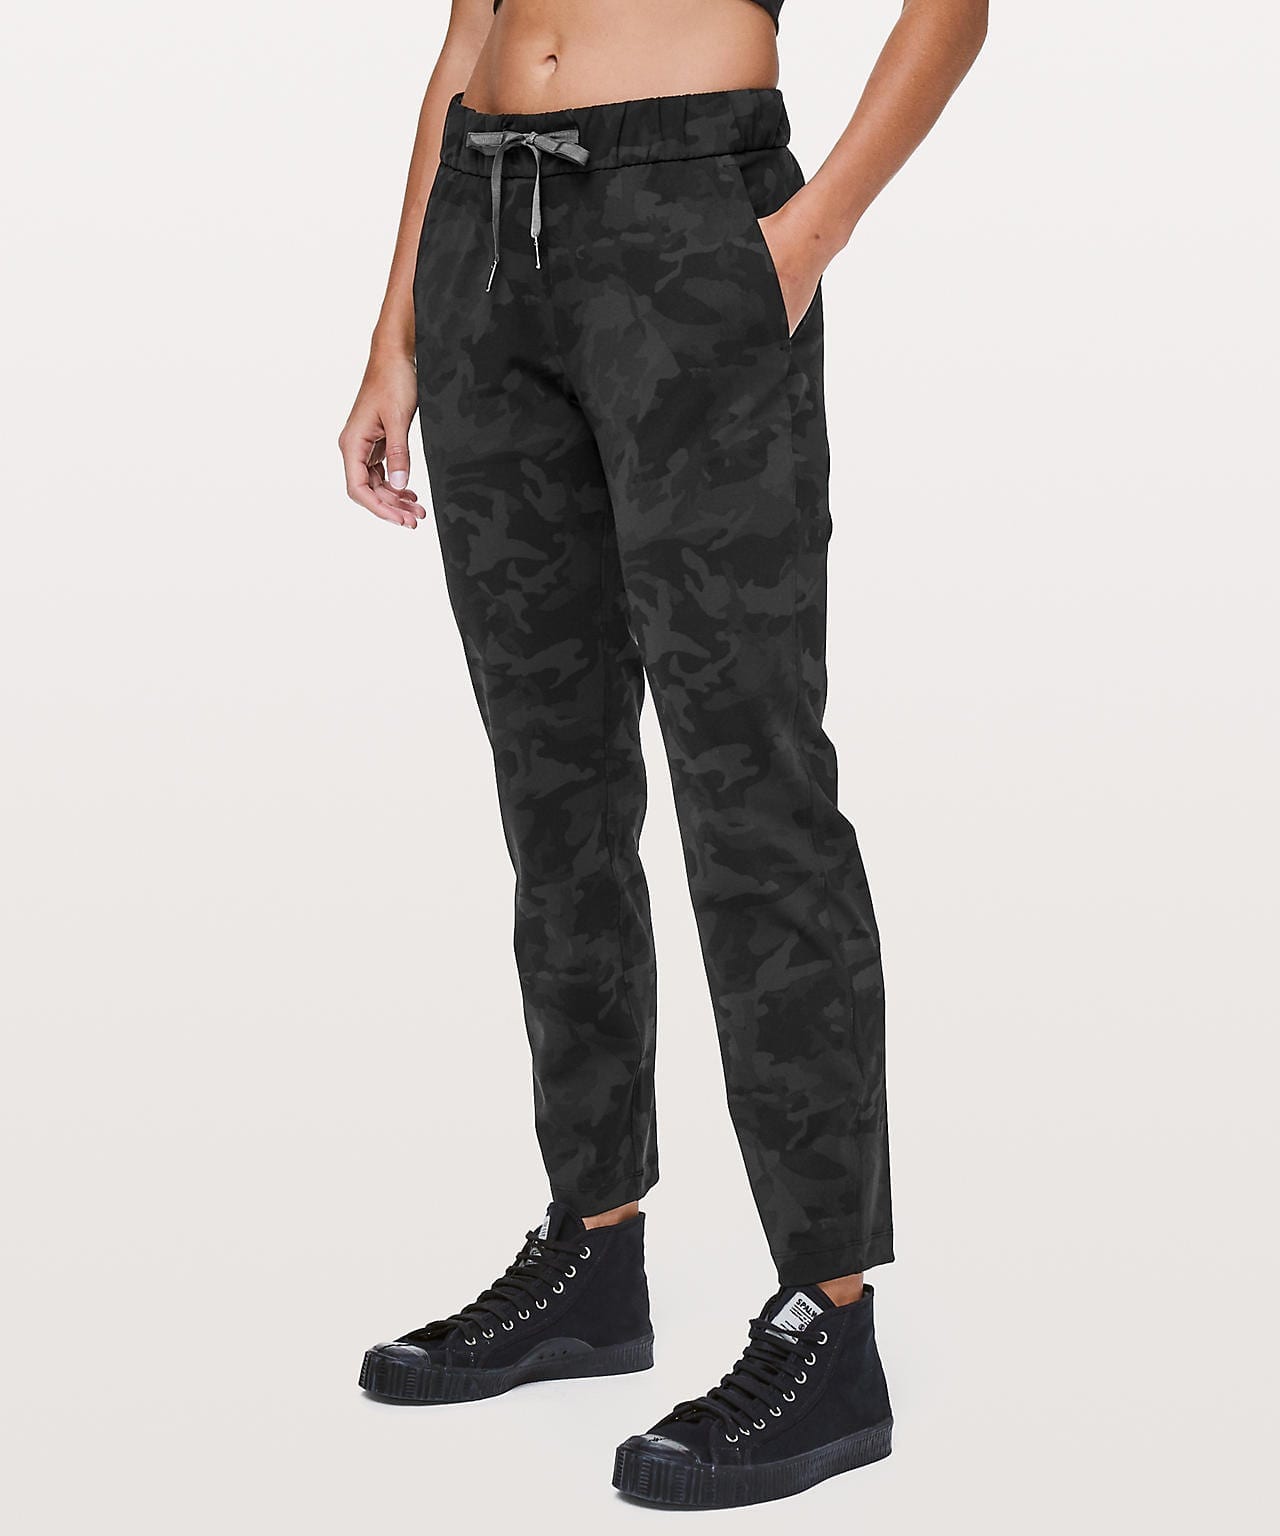 On The Fly Pant, Incognito Camo